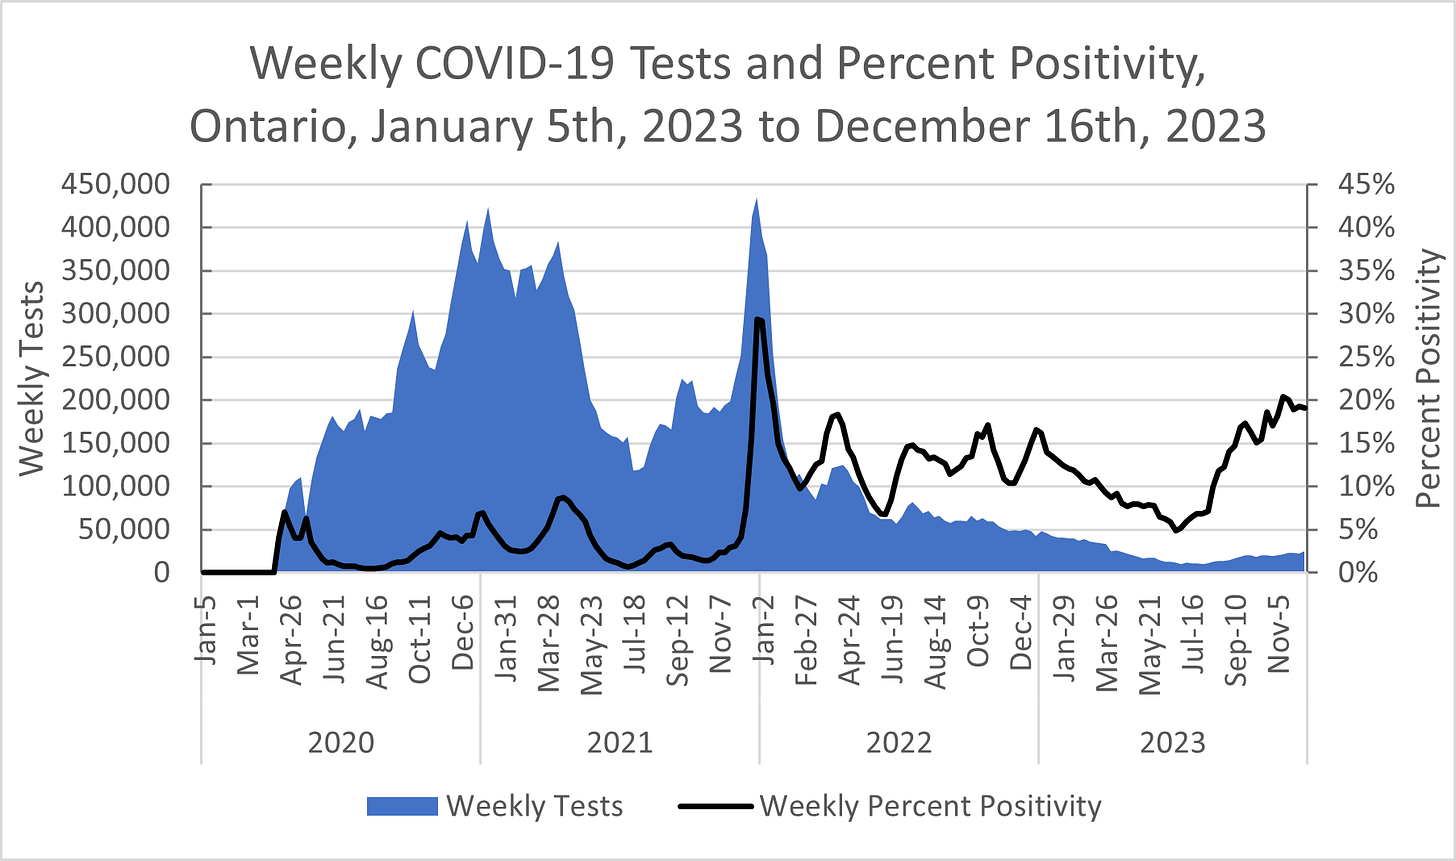 Chart showing weekly COVID-19 tests and percent positivity in Ontario from January 5th, 2023 to December 16th, 2023. Weekly tests rise from 0 in March 2020 to 400,000 in late 2020 to early 2021, drop to 100,000 in Summer 2021, rise to 435,000 in Winter 21/22, then decrease dramatically to around 25,000 by mid-December 2023. Percent positivity fluctuates form 0-10% in 2020 and 2021, rises briefly to 30% in January 2022, hovers between 10% and 20% throughout 2022, drops to 5% in Summer 2023, then rises to 20% by mid-December 2023.